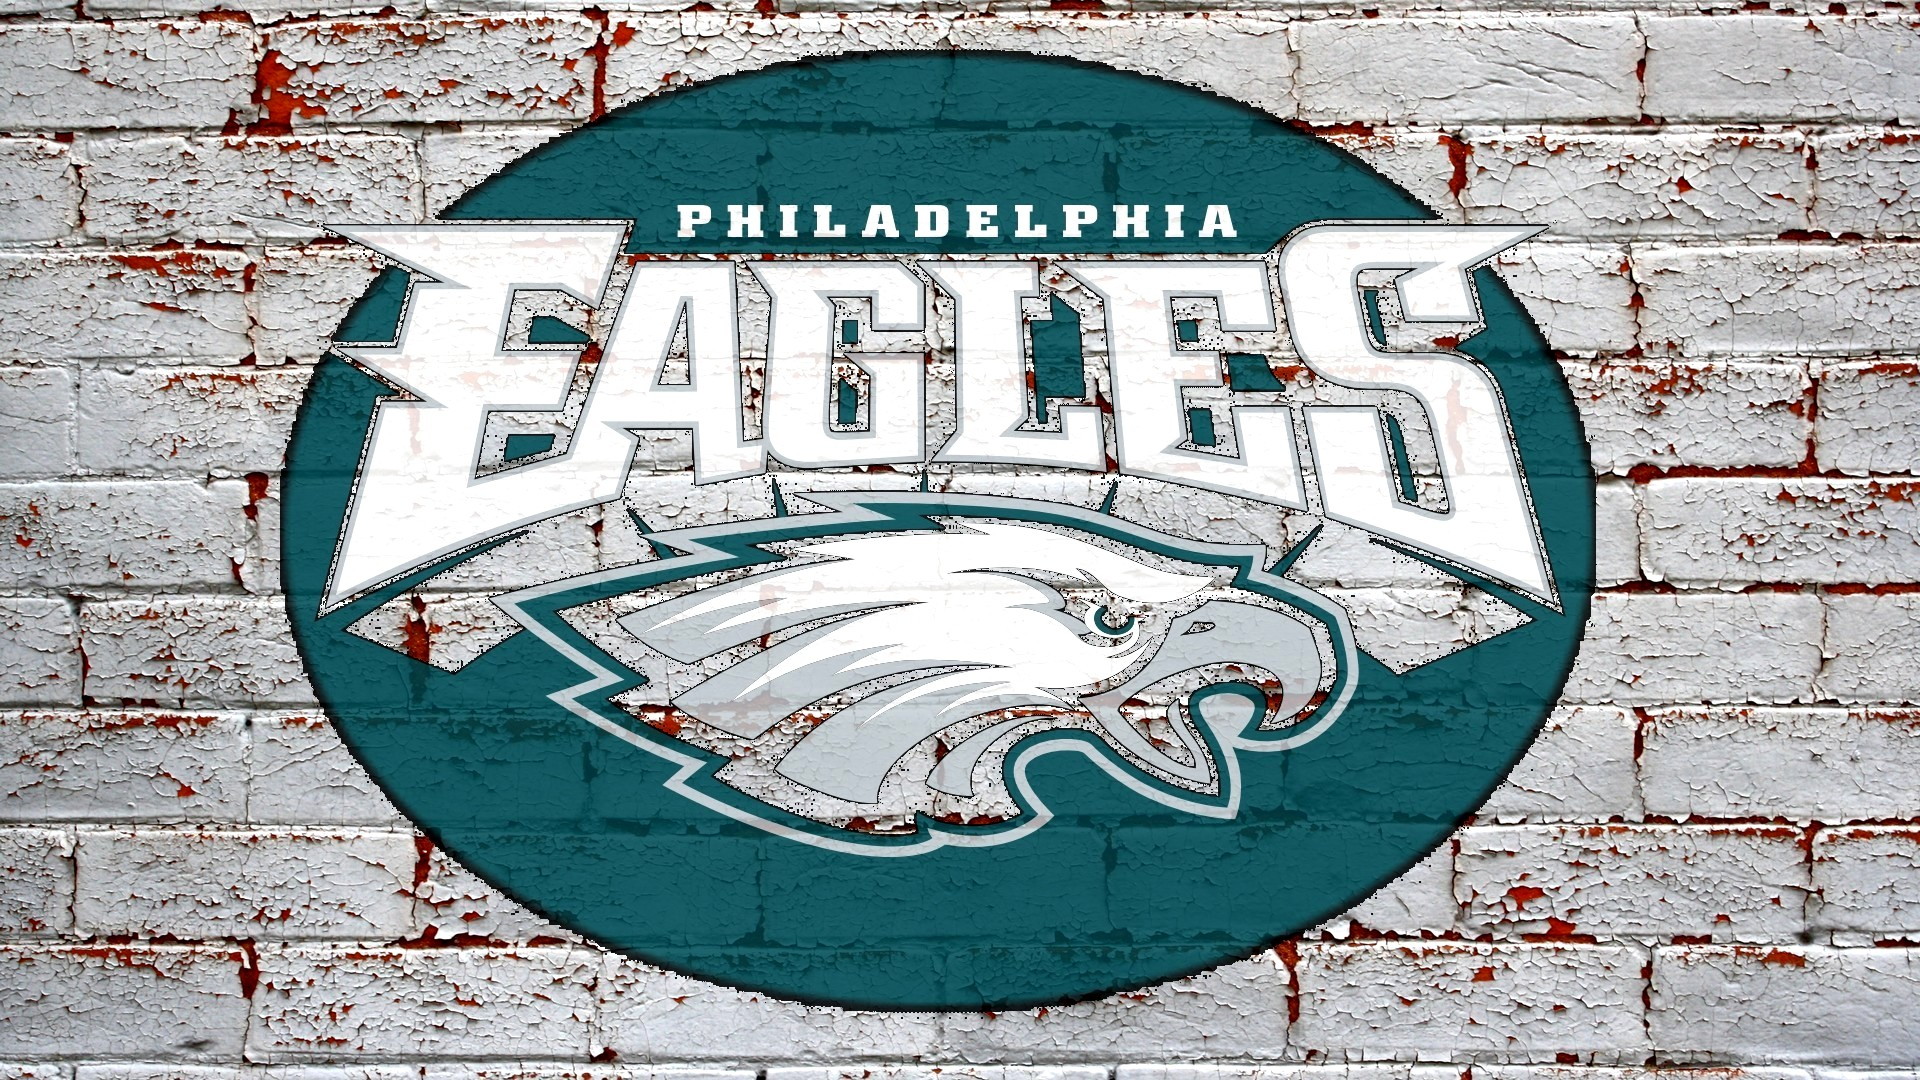 Philadelphia Eagles NFL Desktop Wallpaper HD with high-resolution 1920x1080 pixel. You can use and set as wallpaper for Notebook Screensavers, Mac Wallpapers, Mobile Home Screen, iPhone or Android Phones Lock Screen